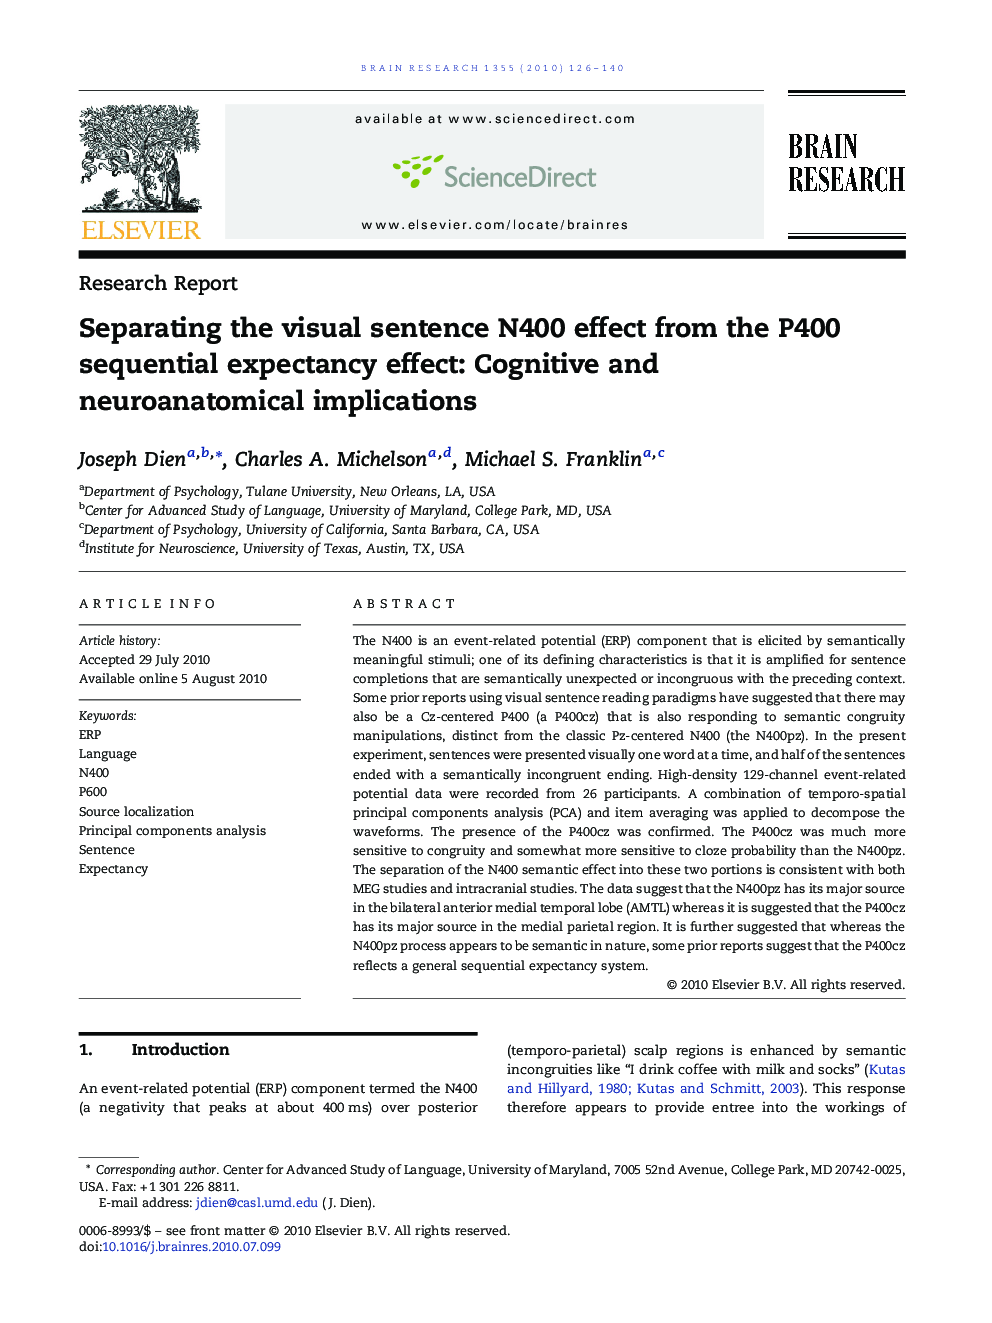 Separating the visual sentence N400 effect from the P400 sequential expectancy effect: Cognitive and neuroanatomical implications